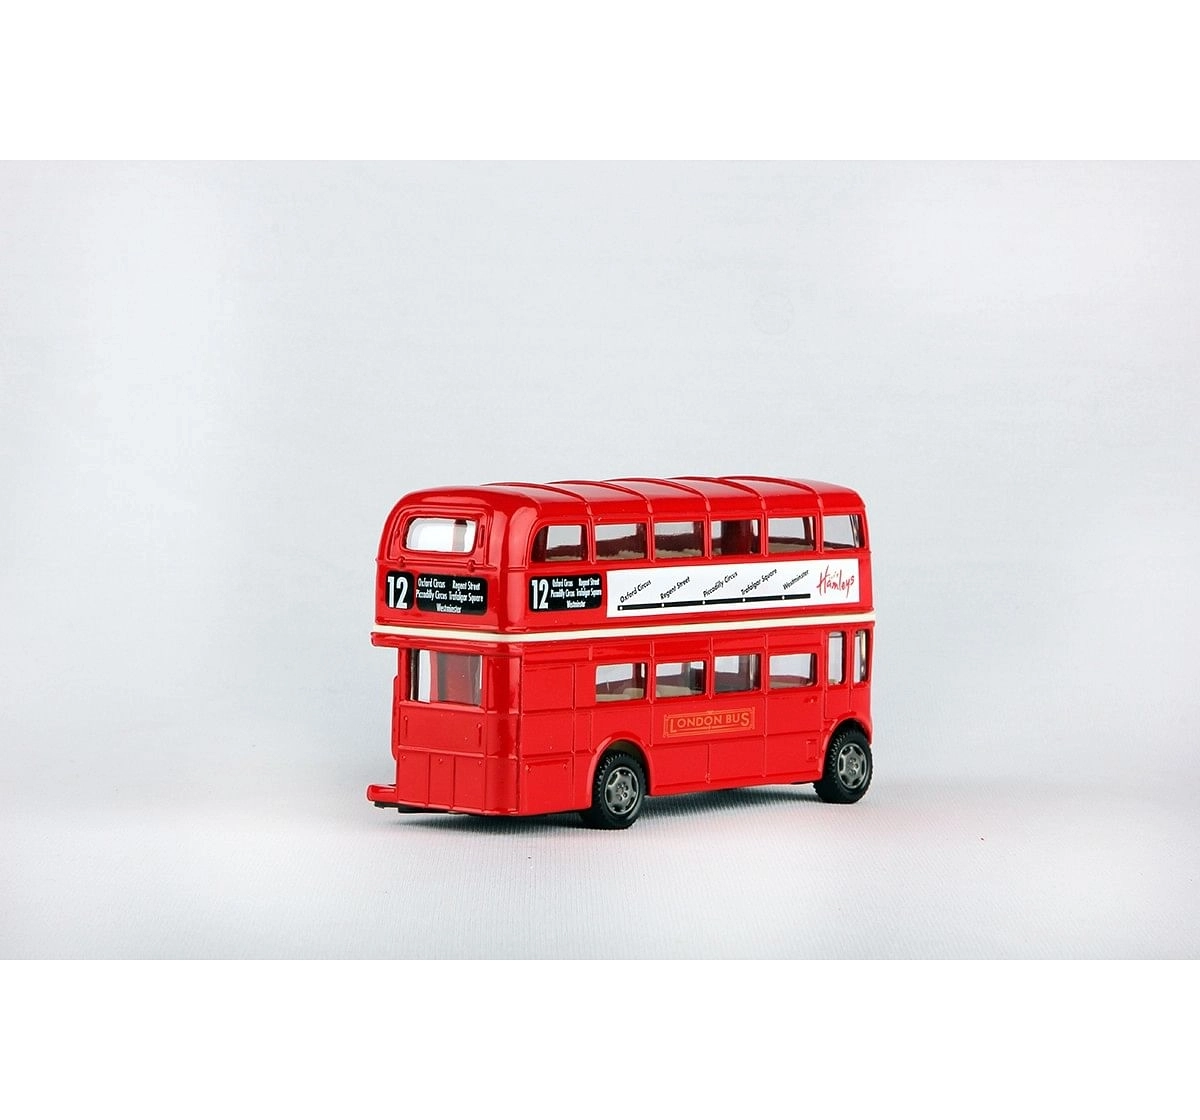  Hamleys London Double Decker Bus (Red) Vehicles for Kids age 3Y+ (Red)